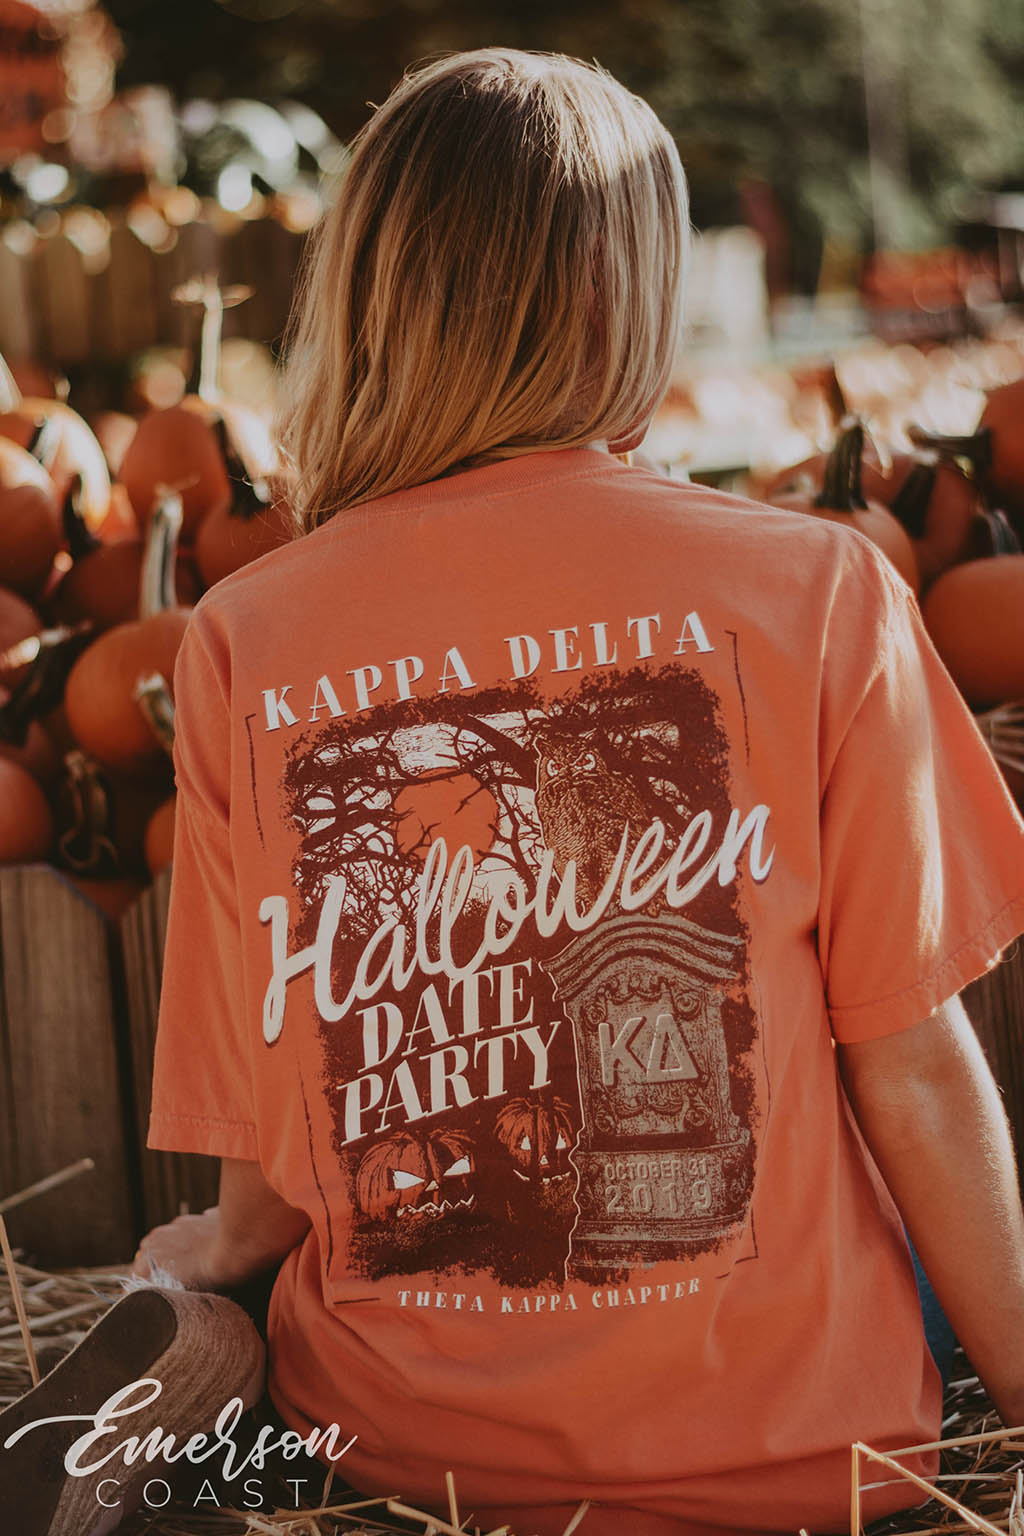 KD Halloween Date Party Tshirt